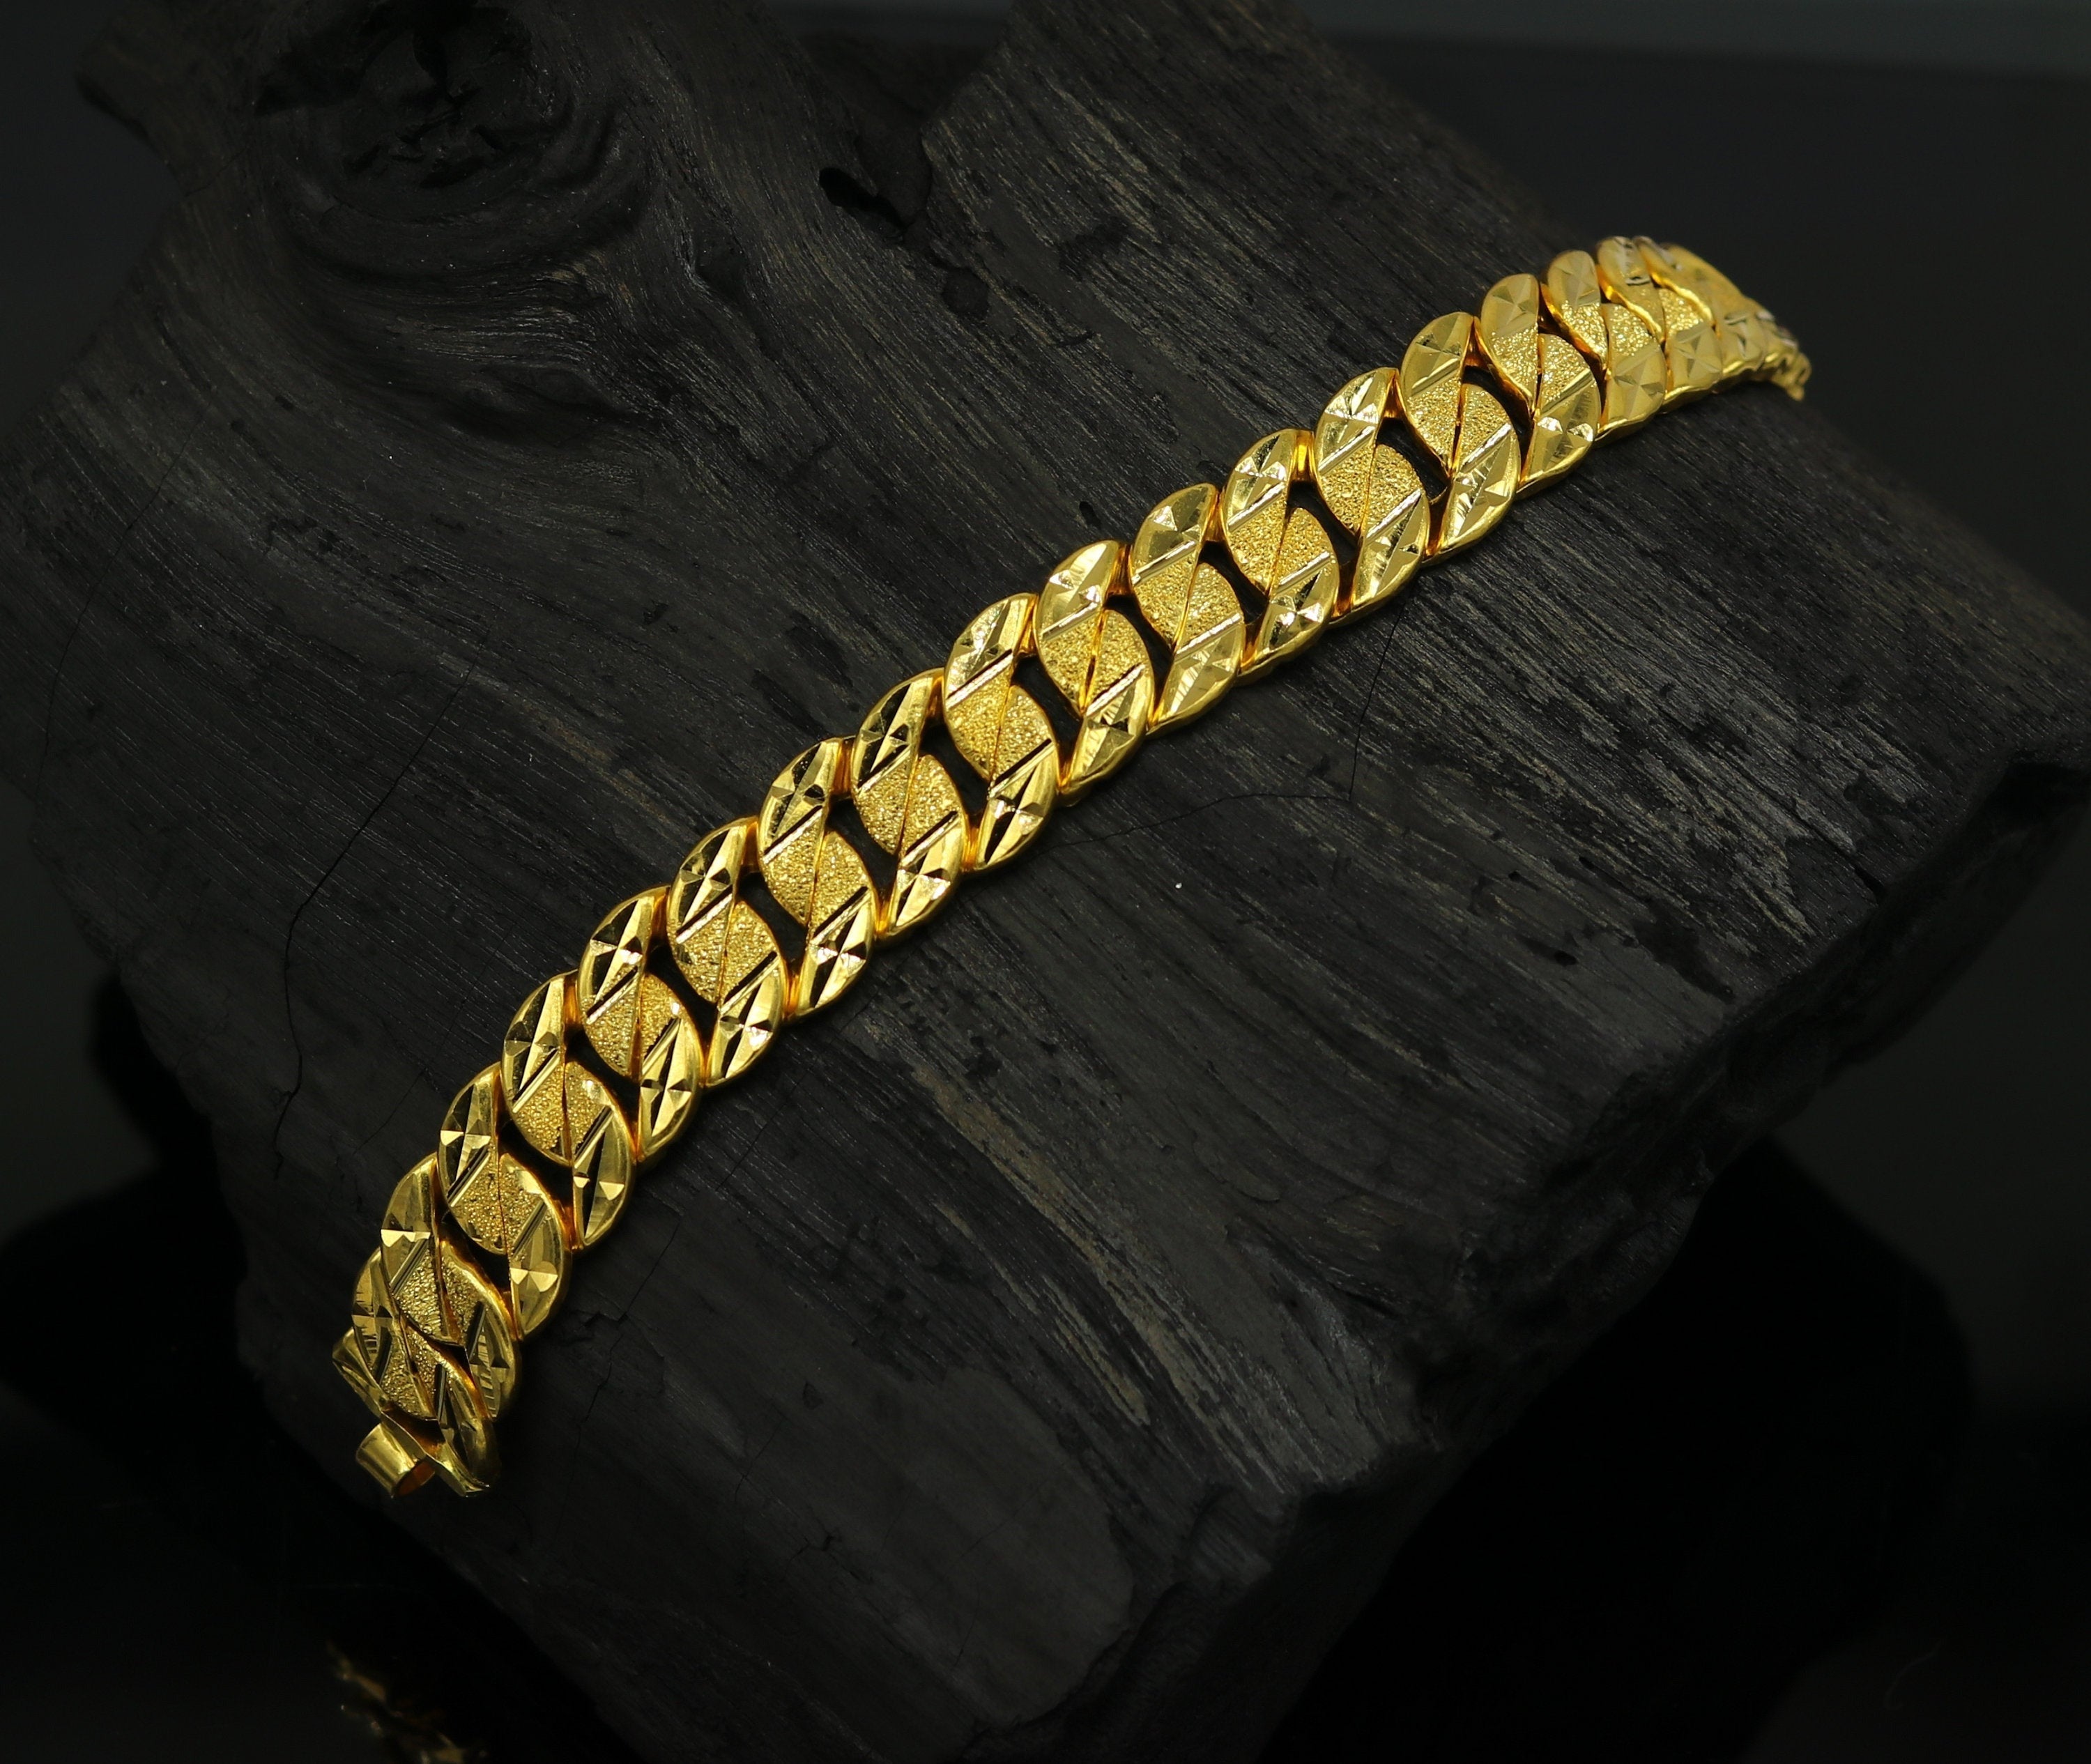 Range of Fashionable Men's Bracelets to Carry Out an Amazing Look Every Day  - Seven Rocks